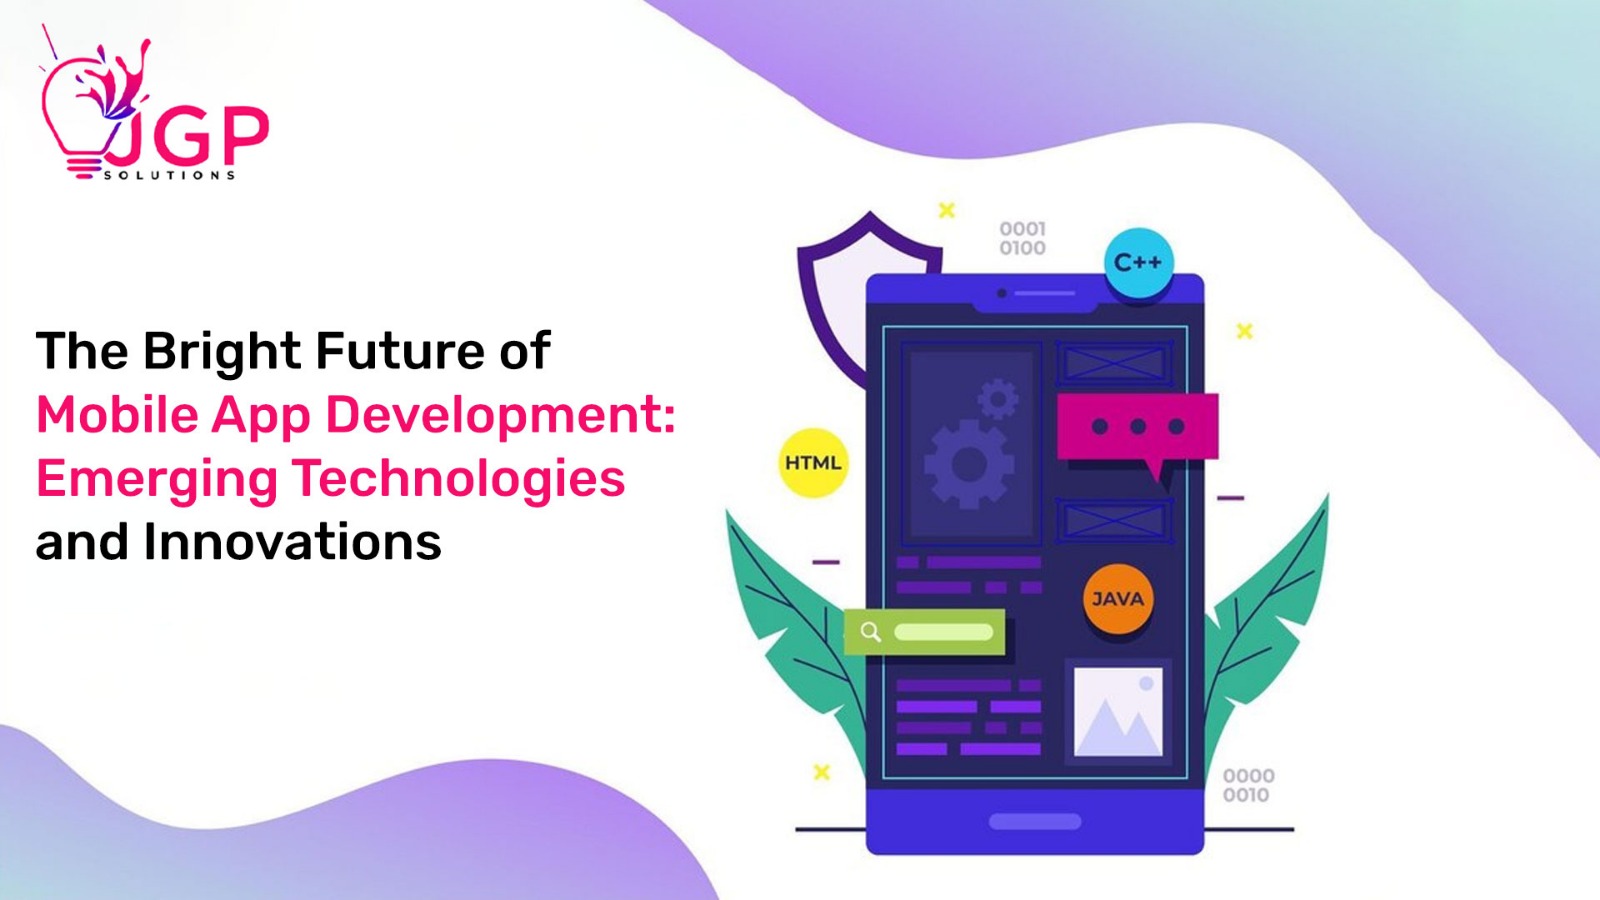 "The Bright Future of Mobile App Development: Emerging Technologies and Innovations"